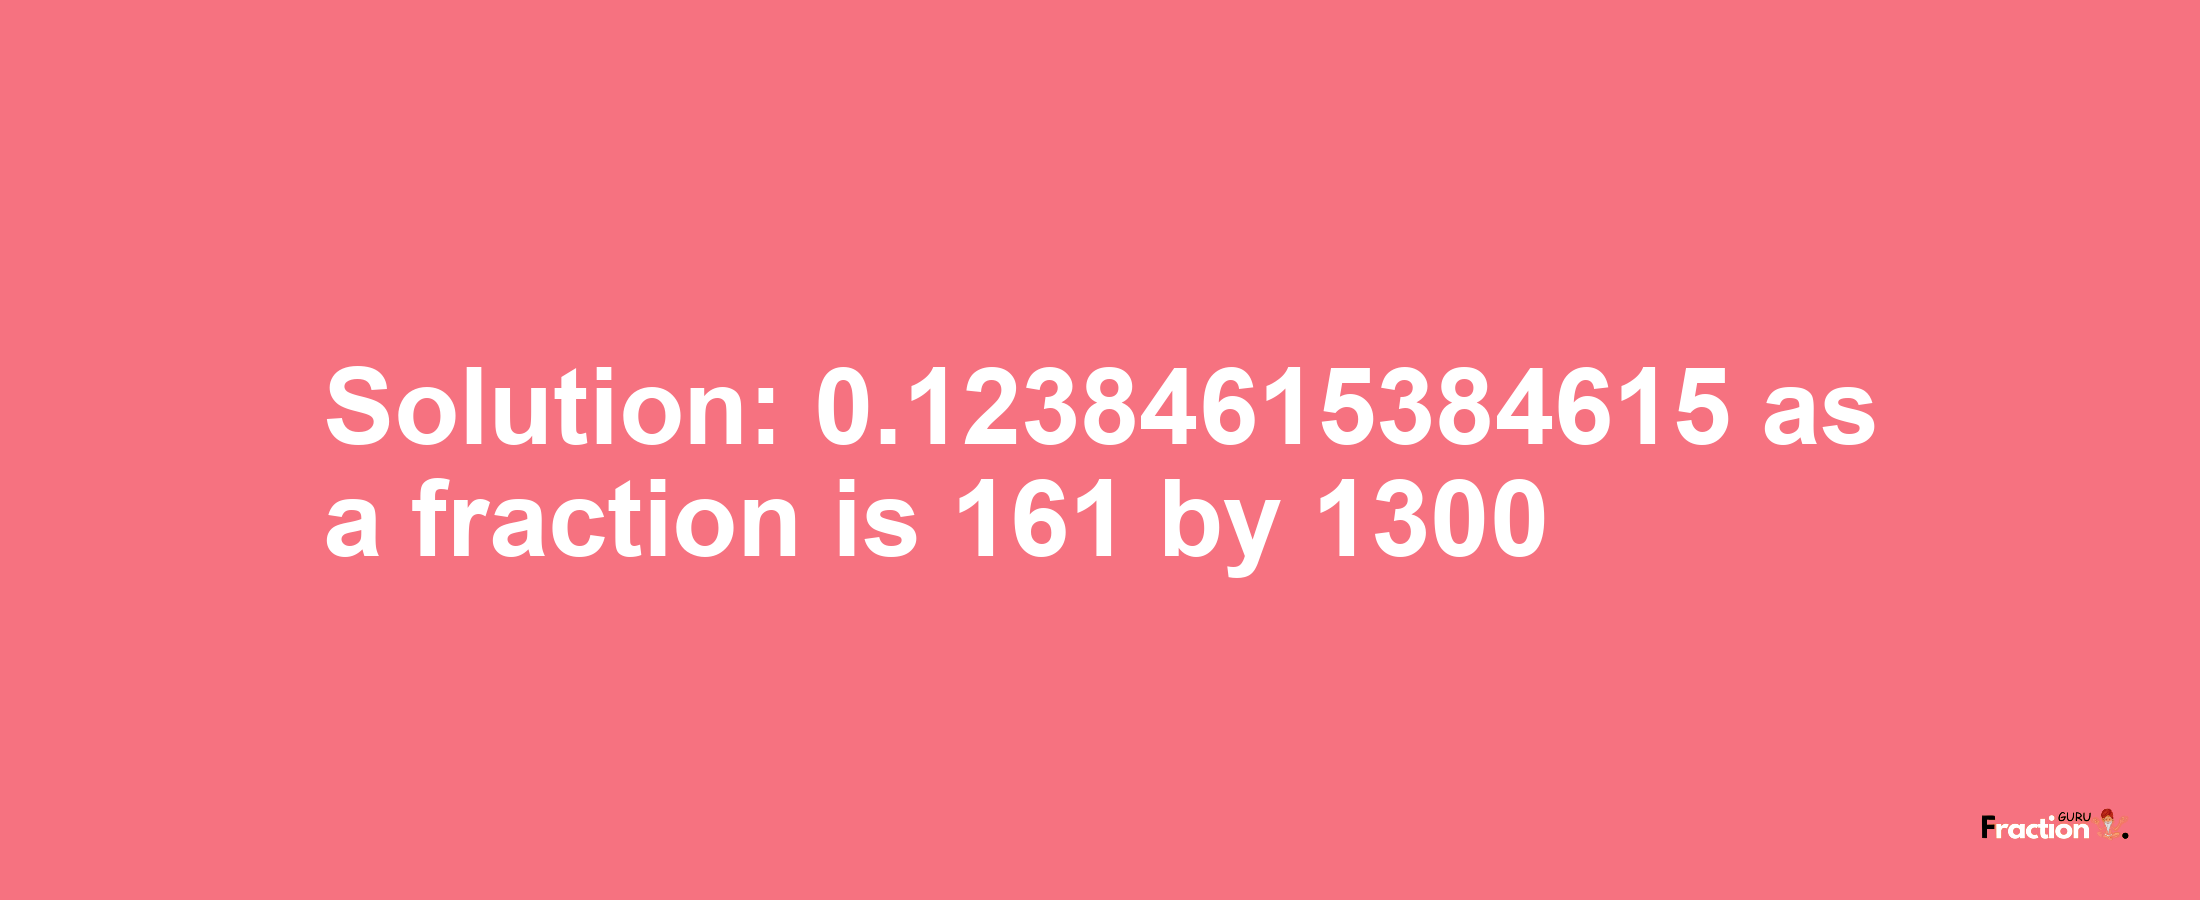 Solution:0.12384615384615 as a fraction is 161/1300